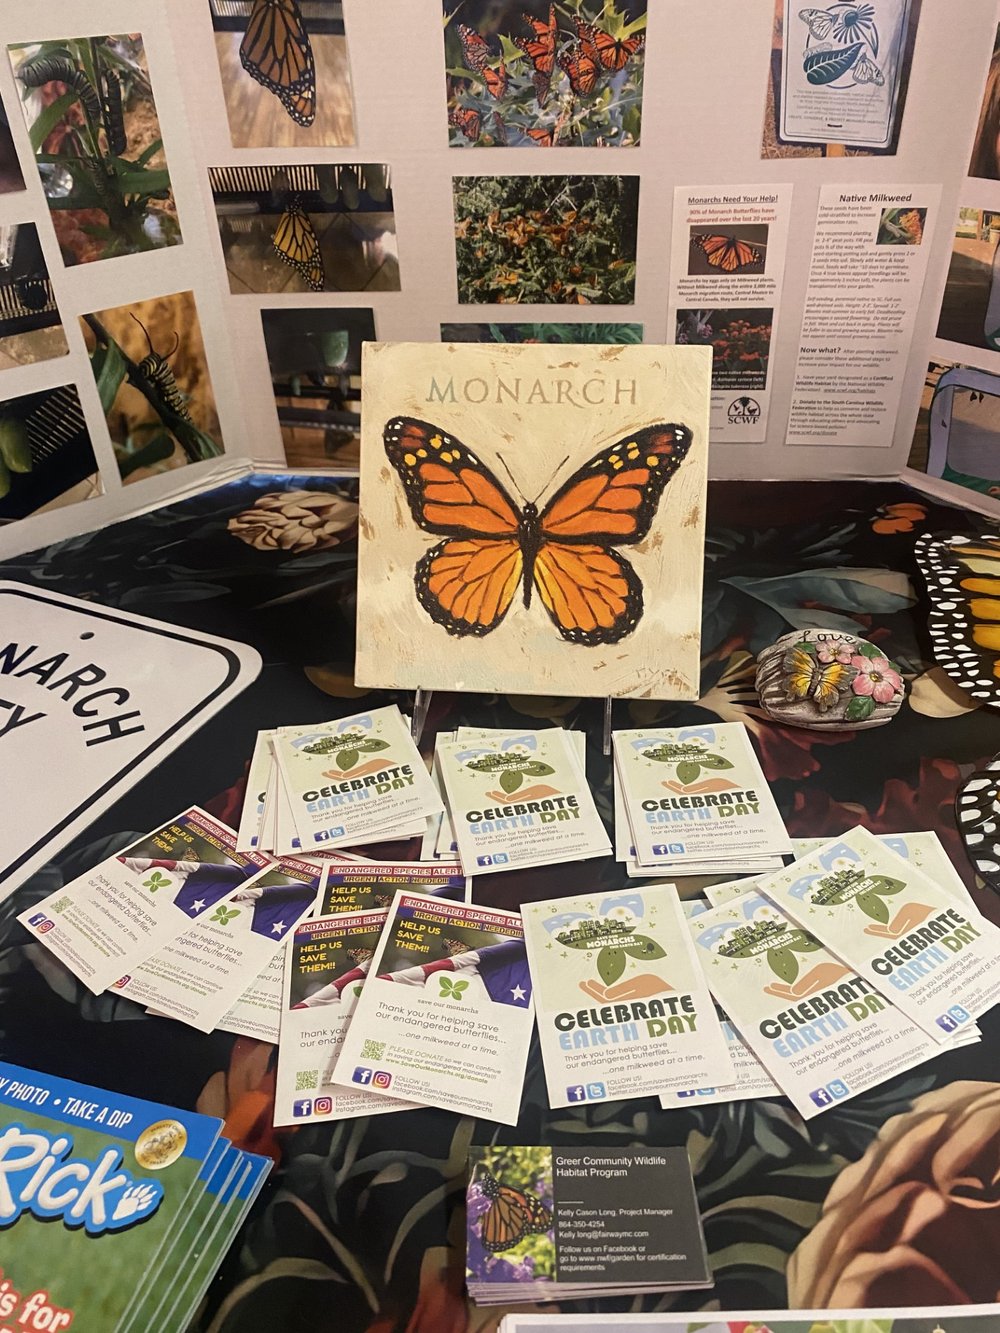 Kelly helped distribute hundreds of milkweed seed packets for monarchs!